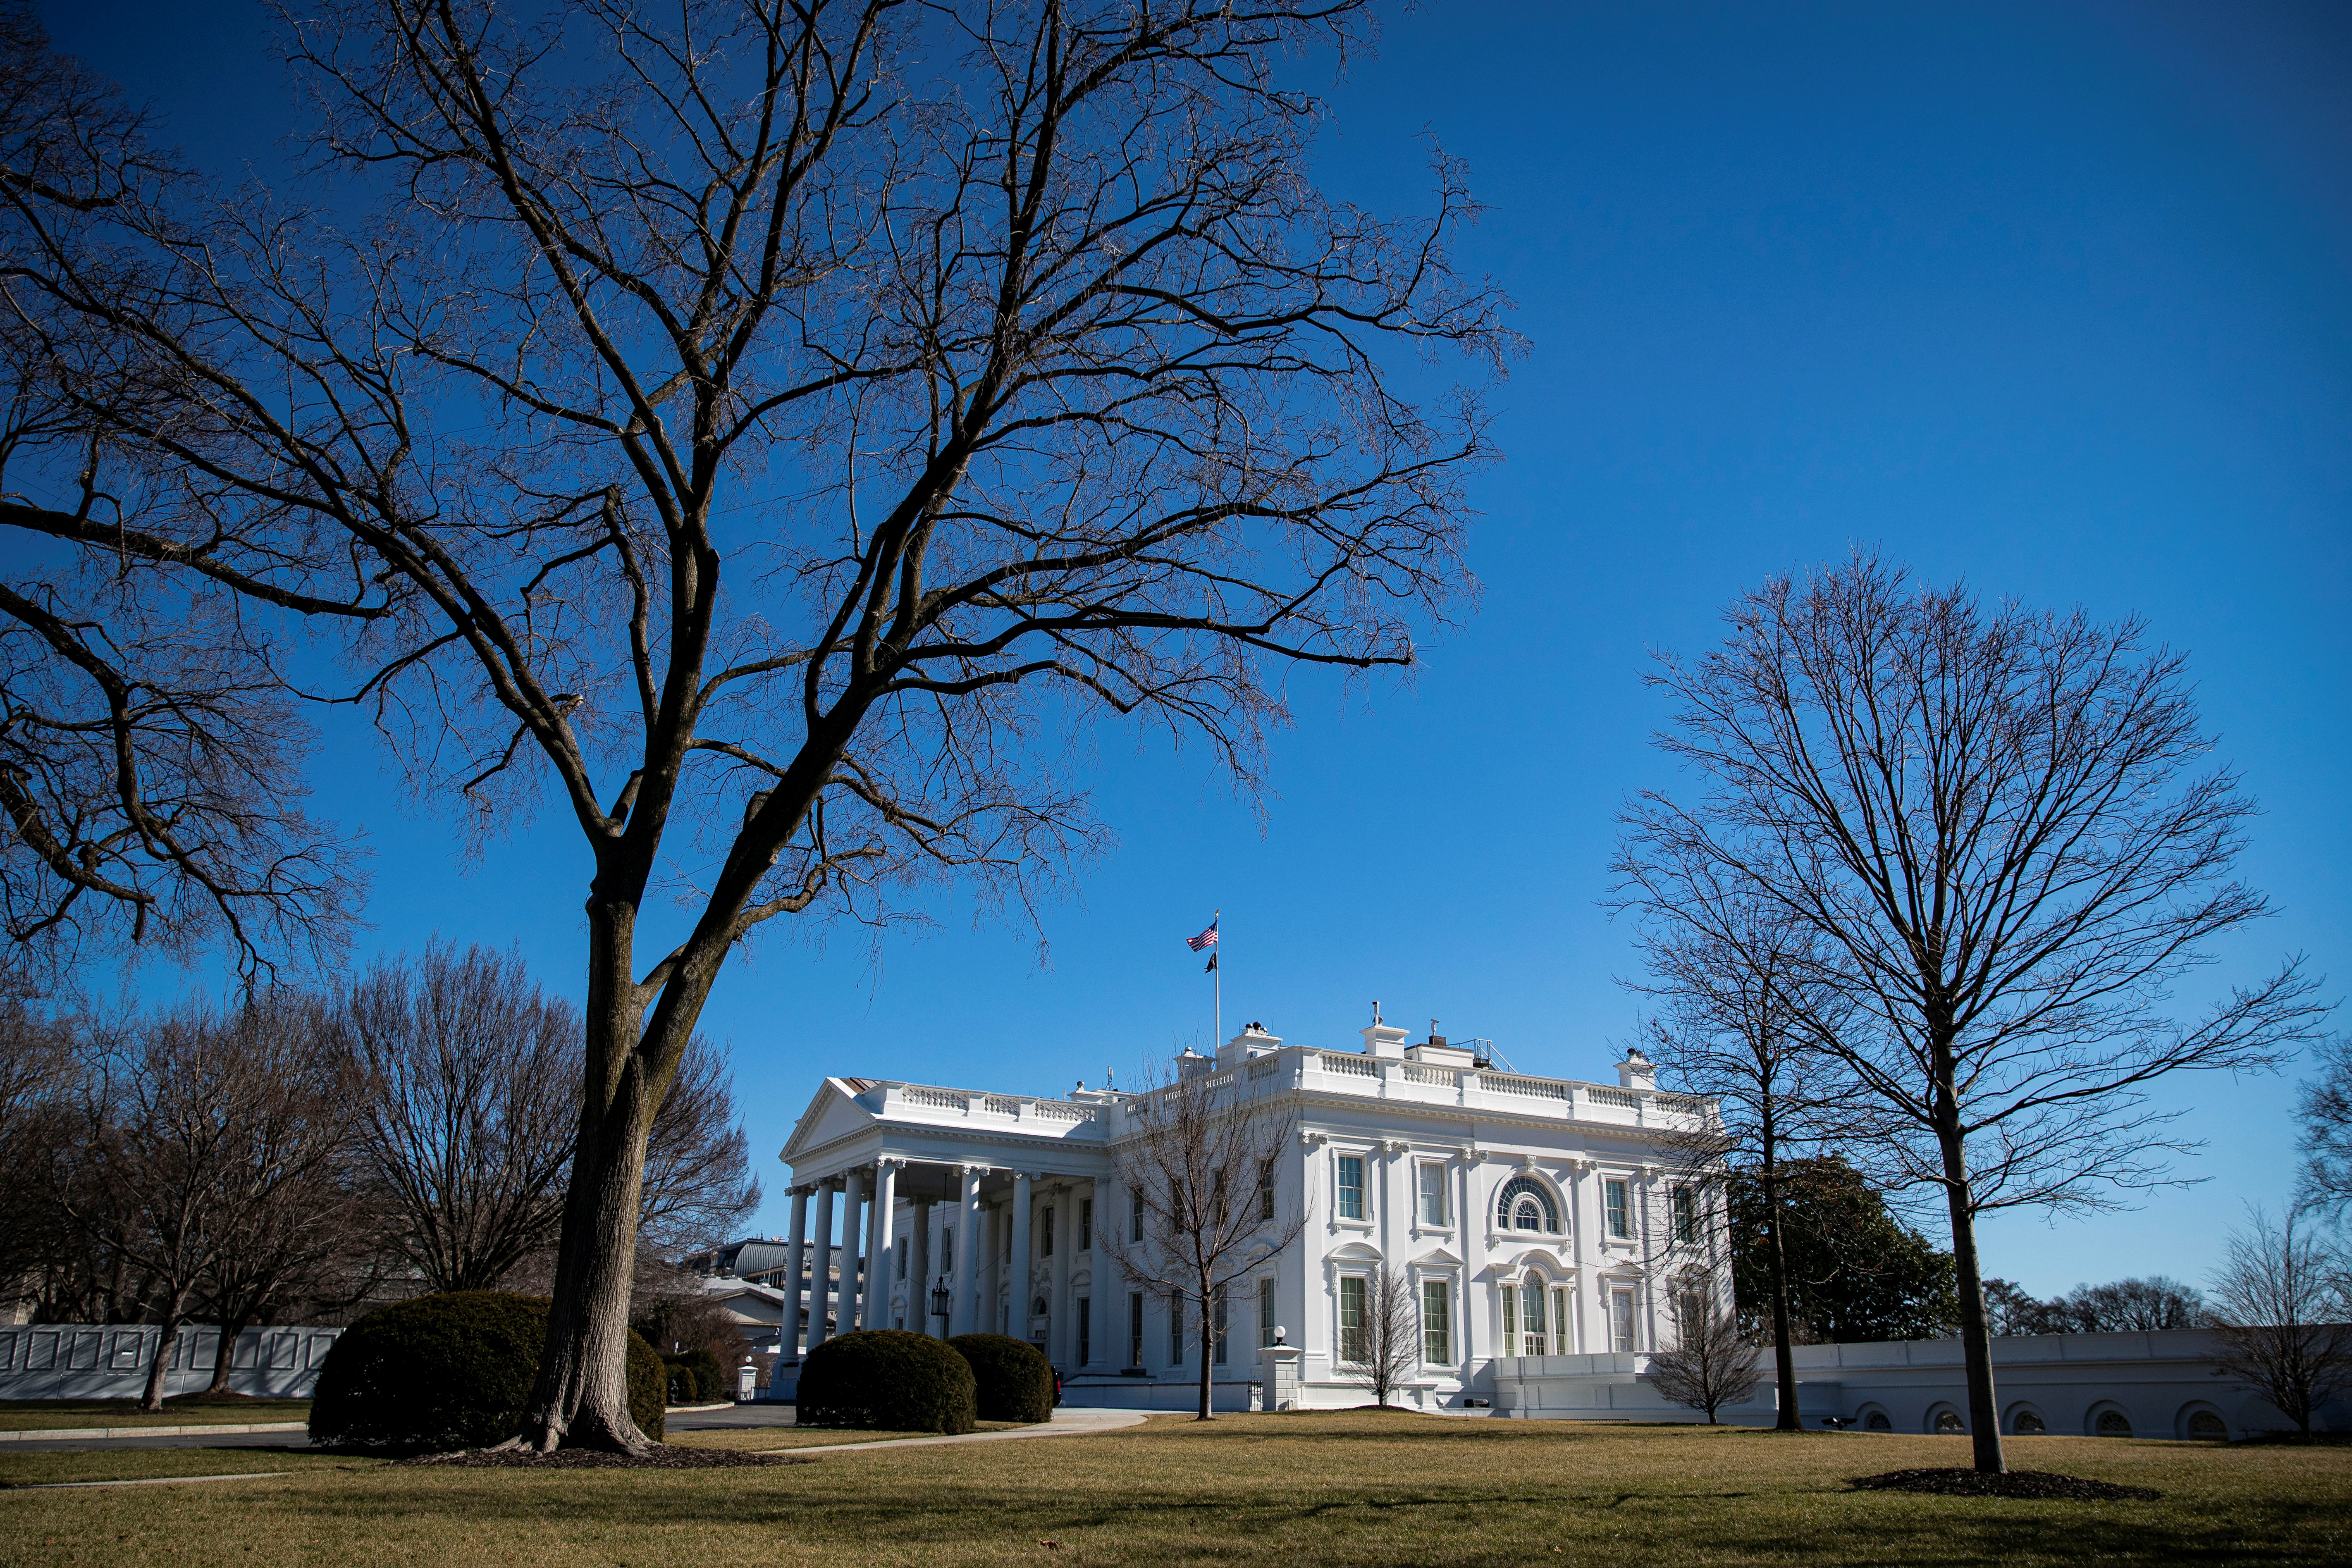 View shows the exterior of the White House in Washington